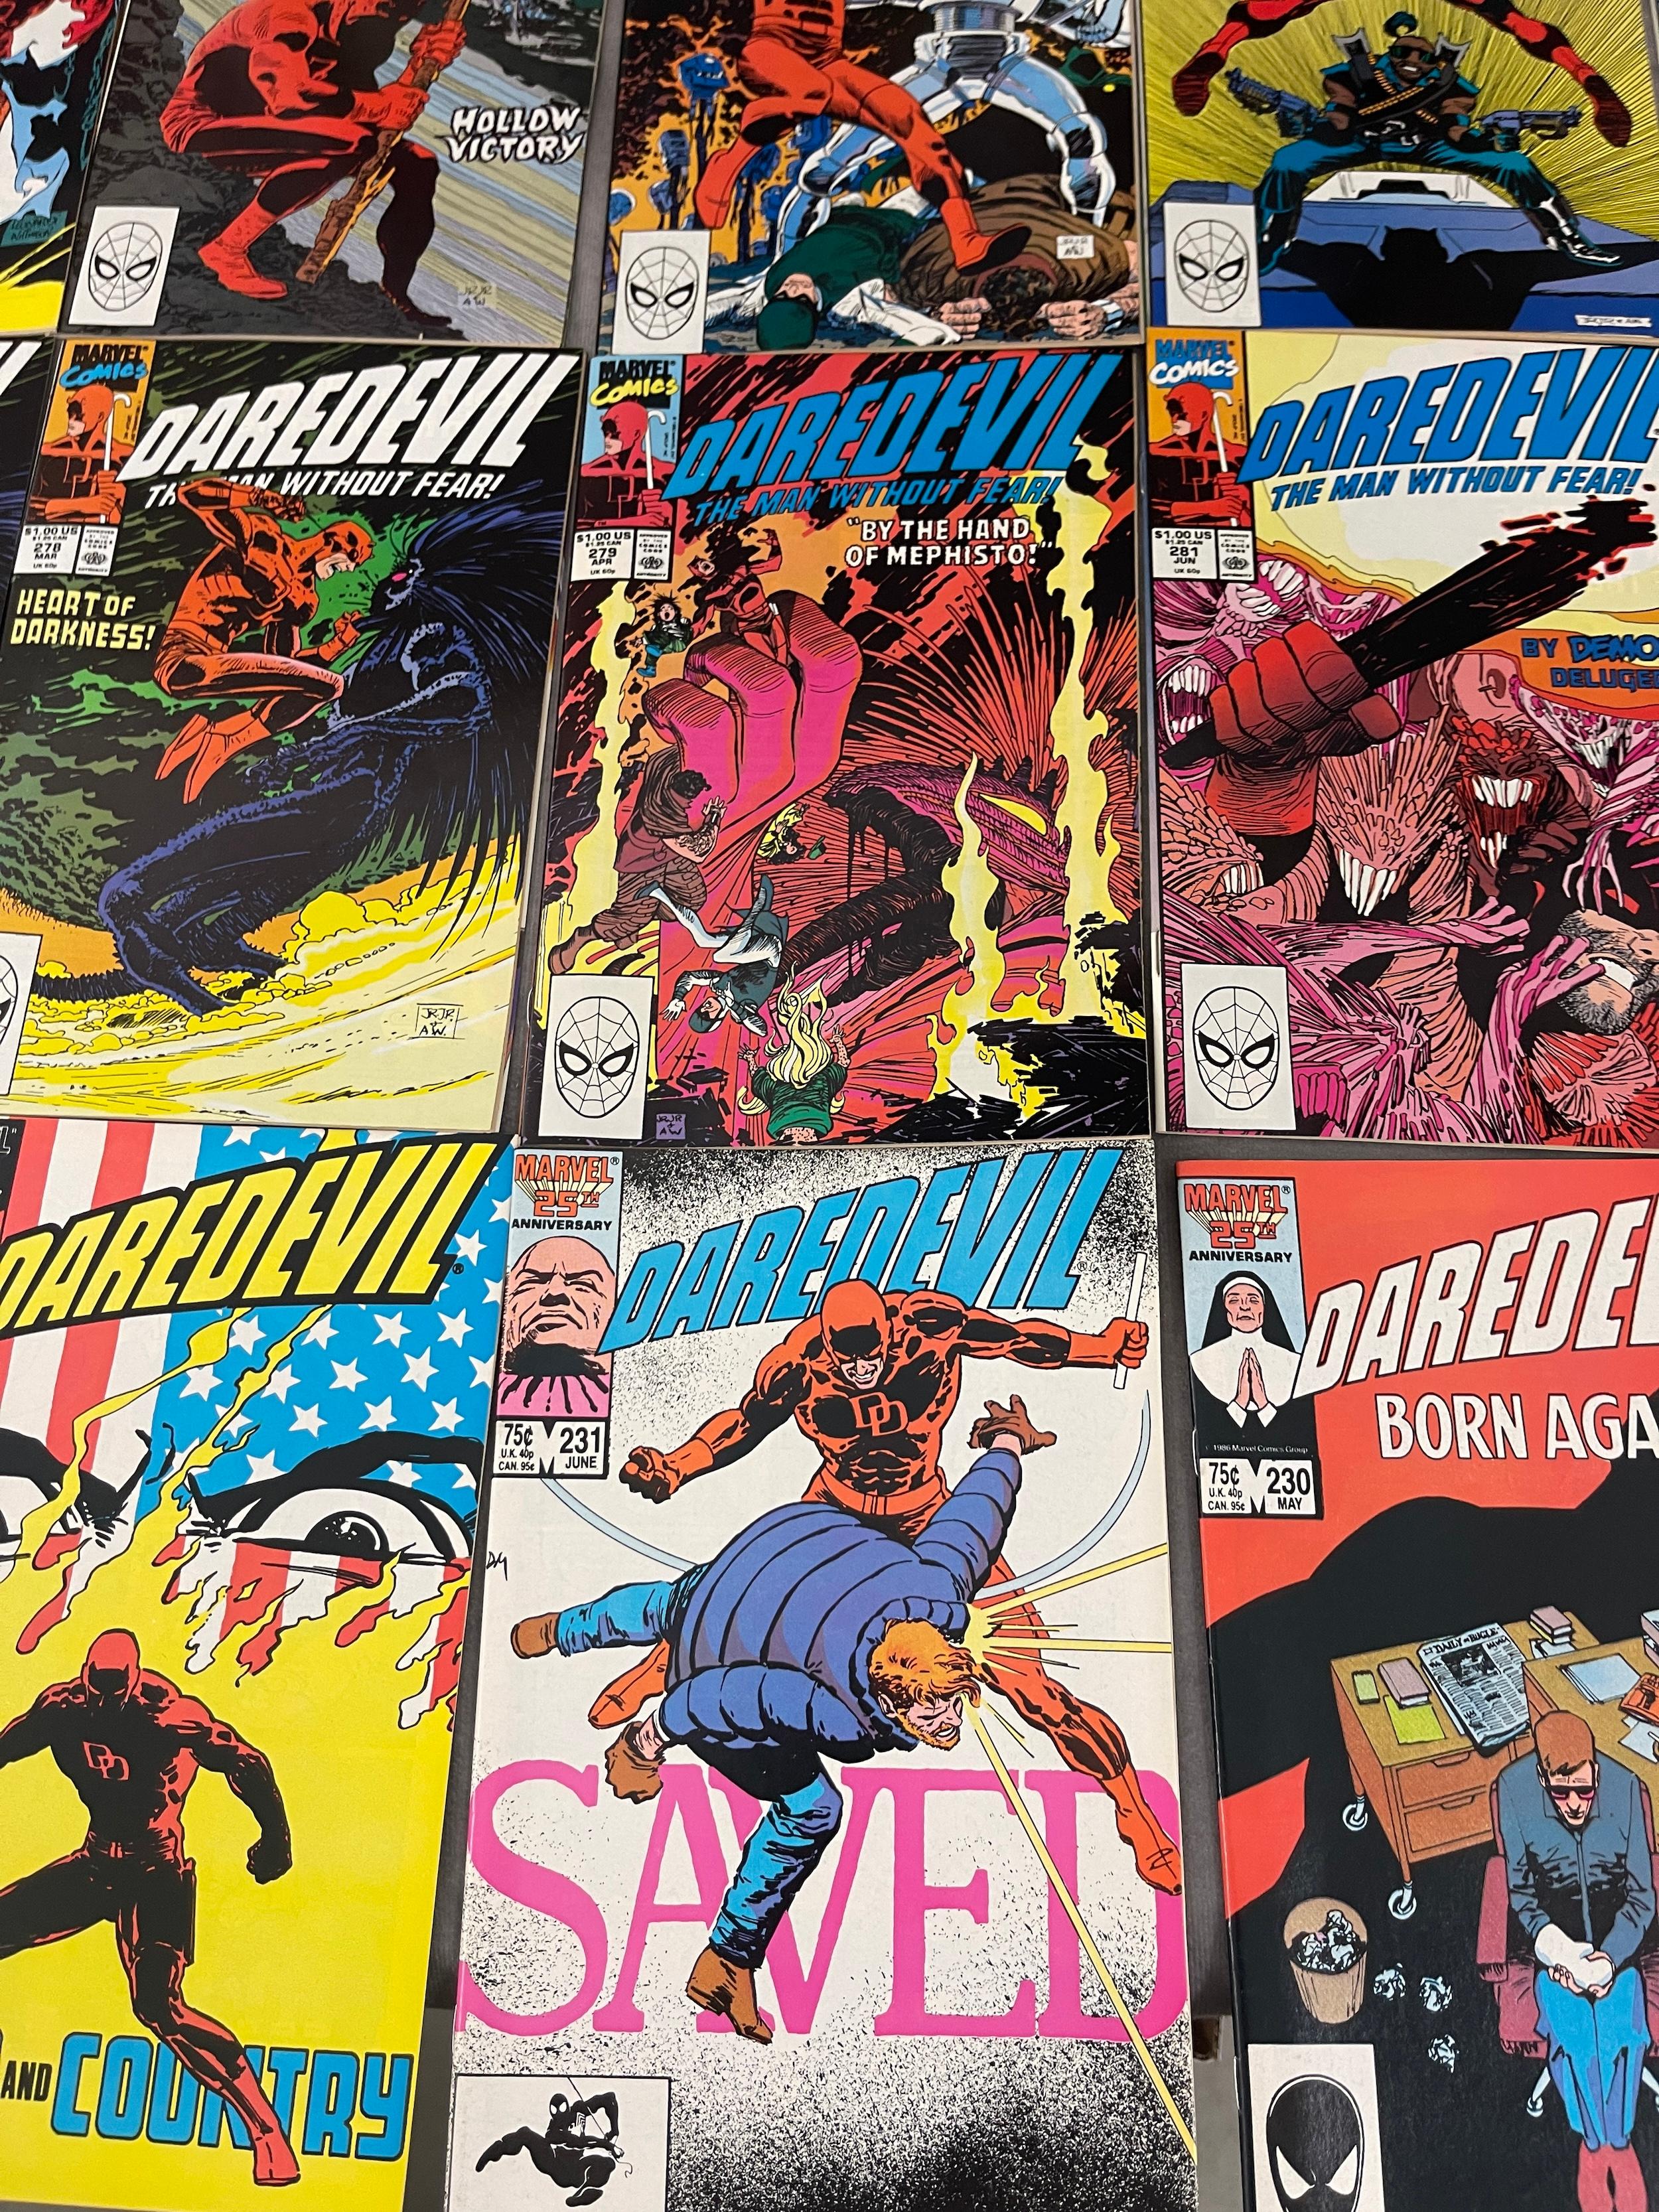 Daredevil Marvel Comic Book Collection Lot of 30